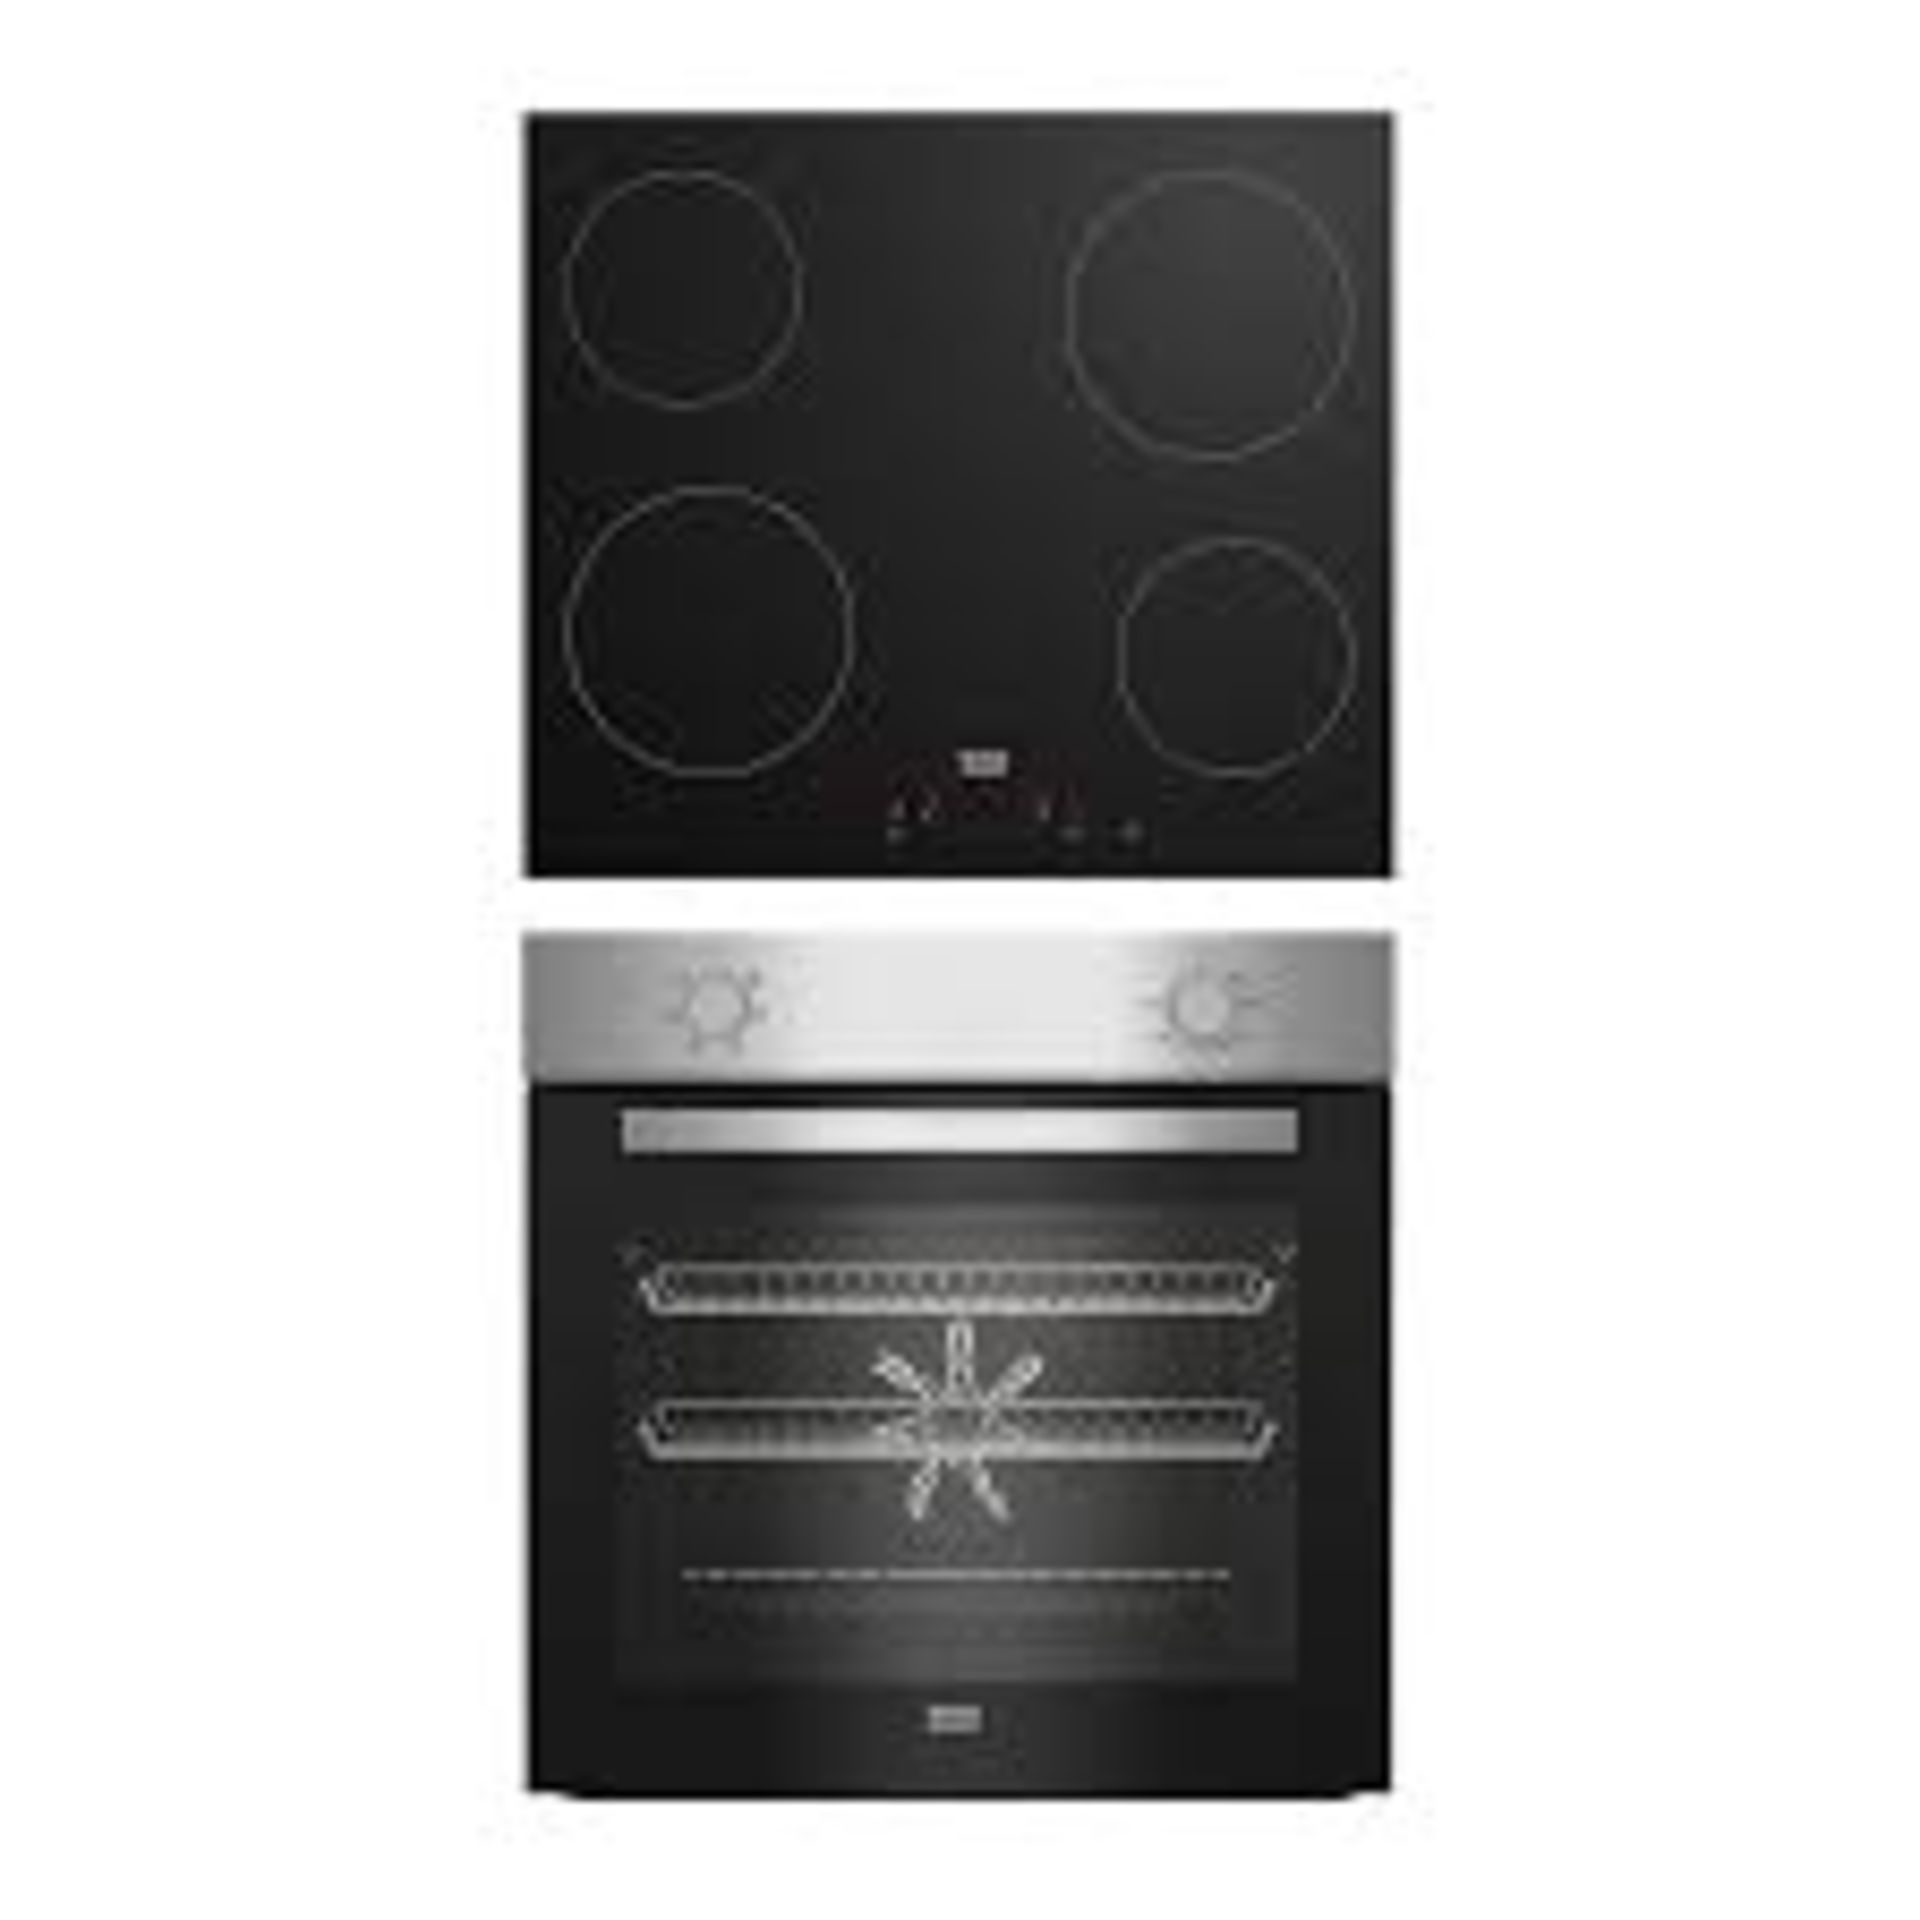 Beko QBSE222X Stainless steel Built-in Multifunction Oven & hob pack (MAY HAVE DAMAGE TO THE ITEM